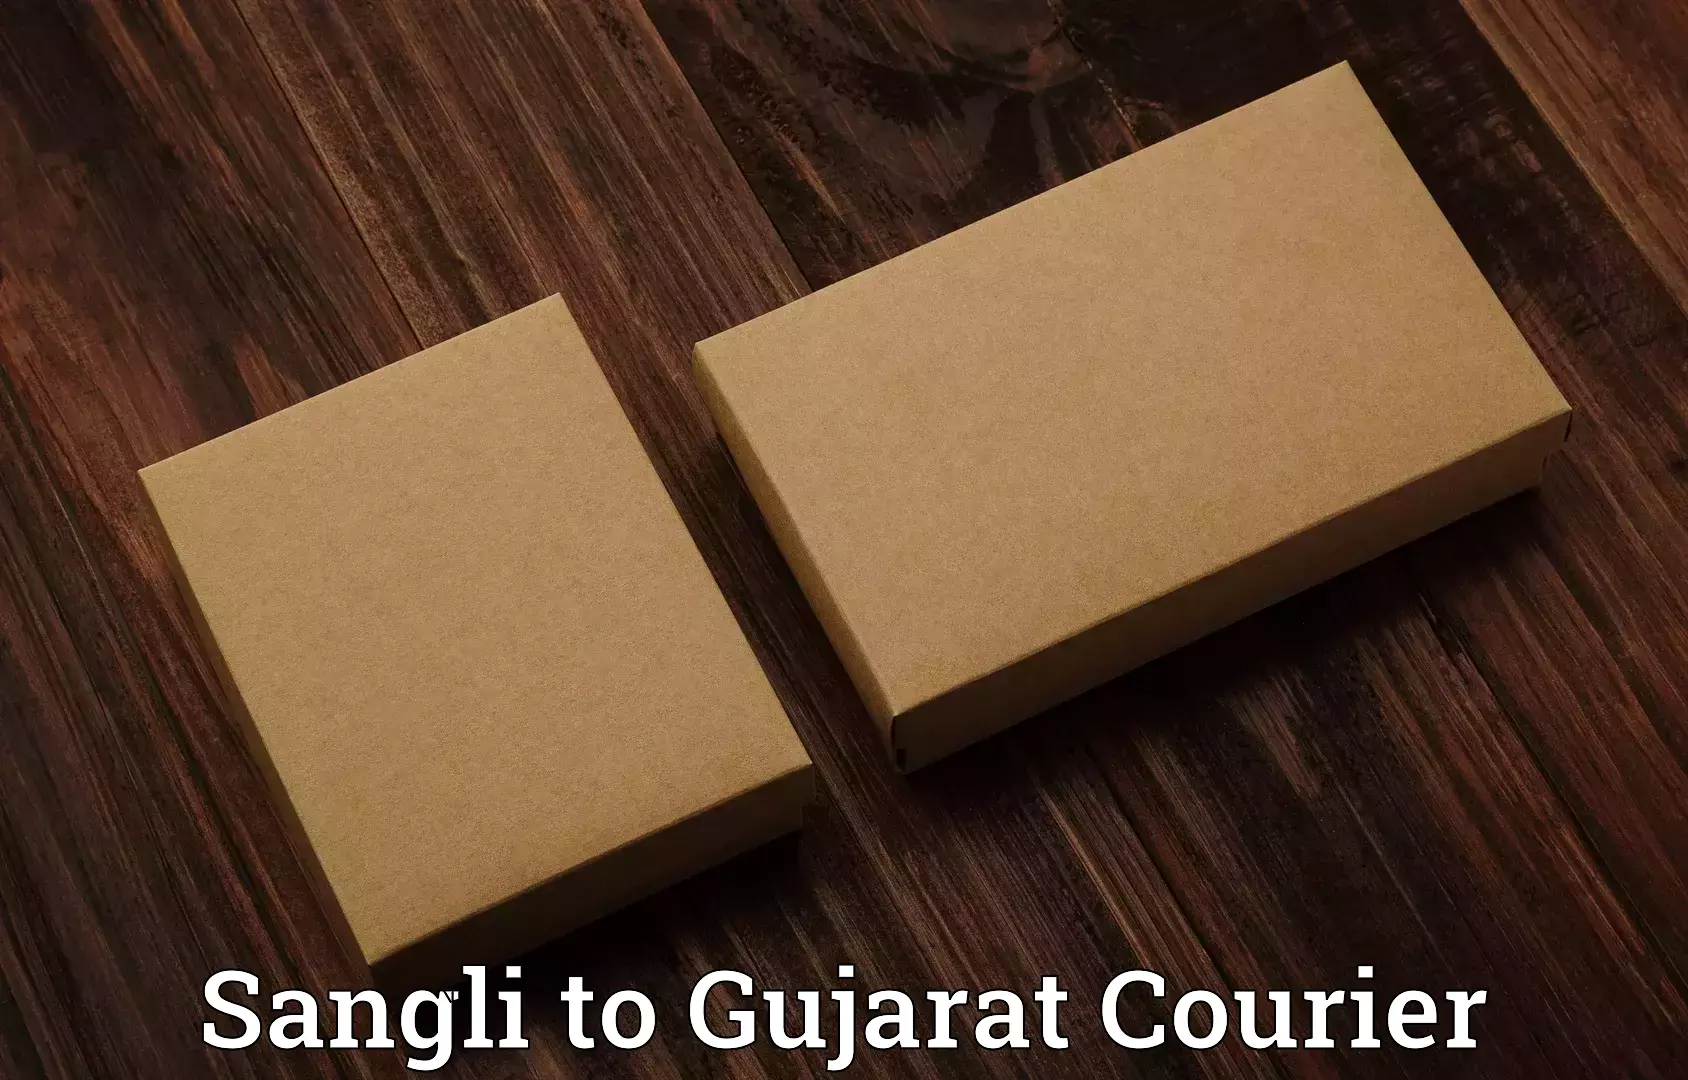 Luggage shipping specialists Sangli to Gujarat